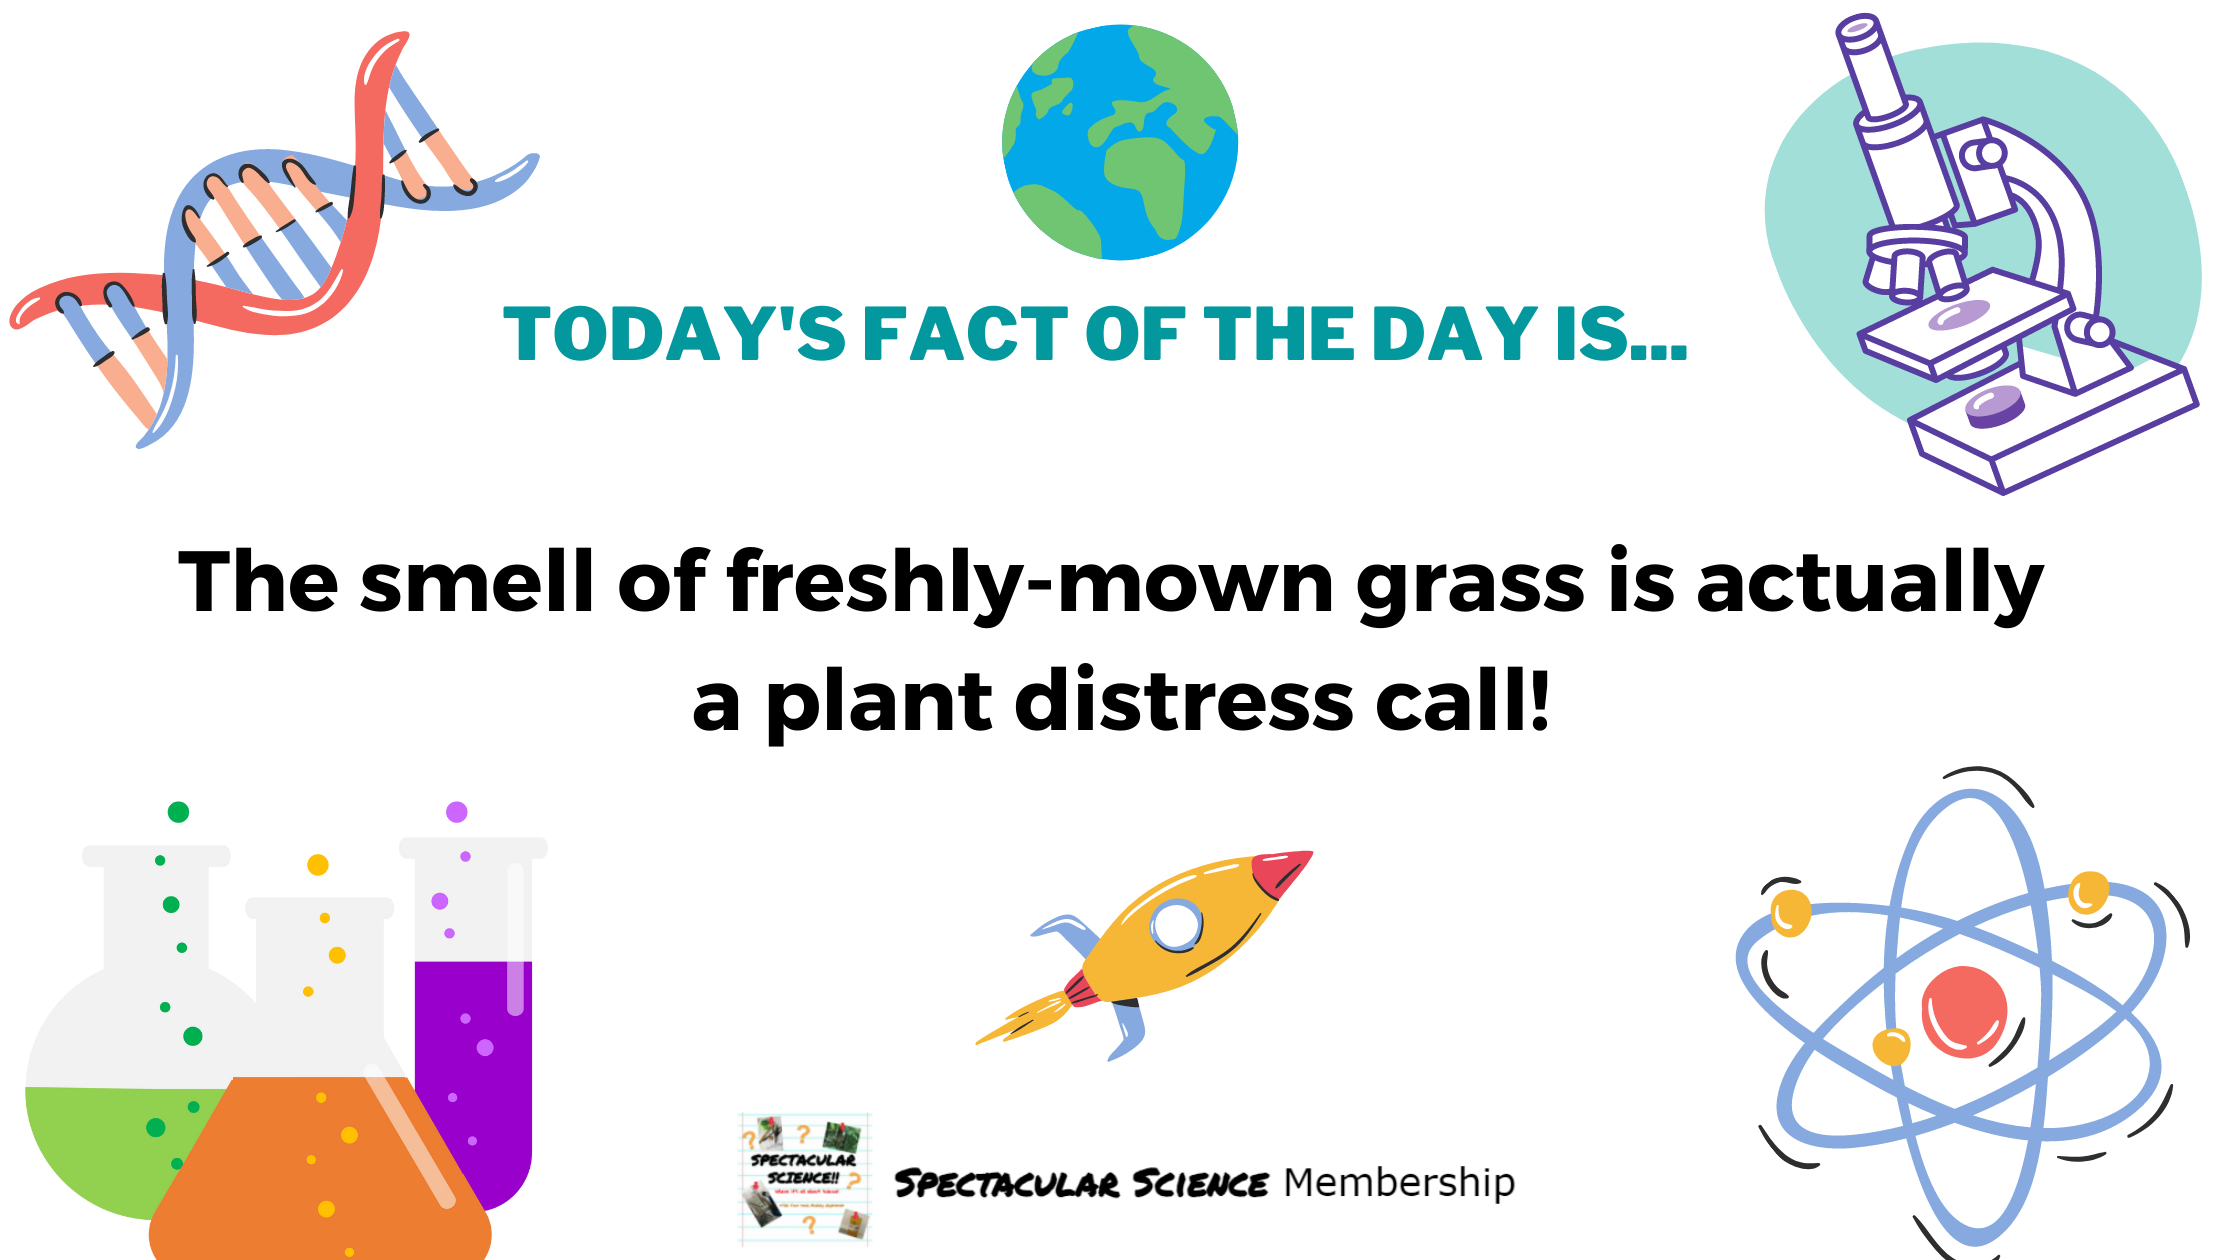 Fact of the Day Image Nov. 27th